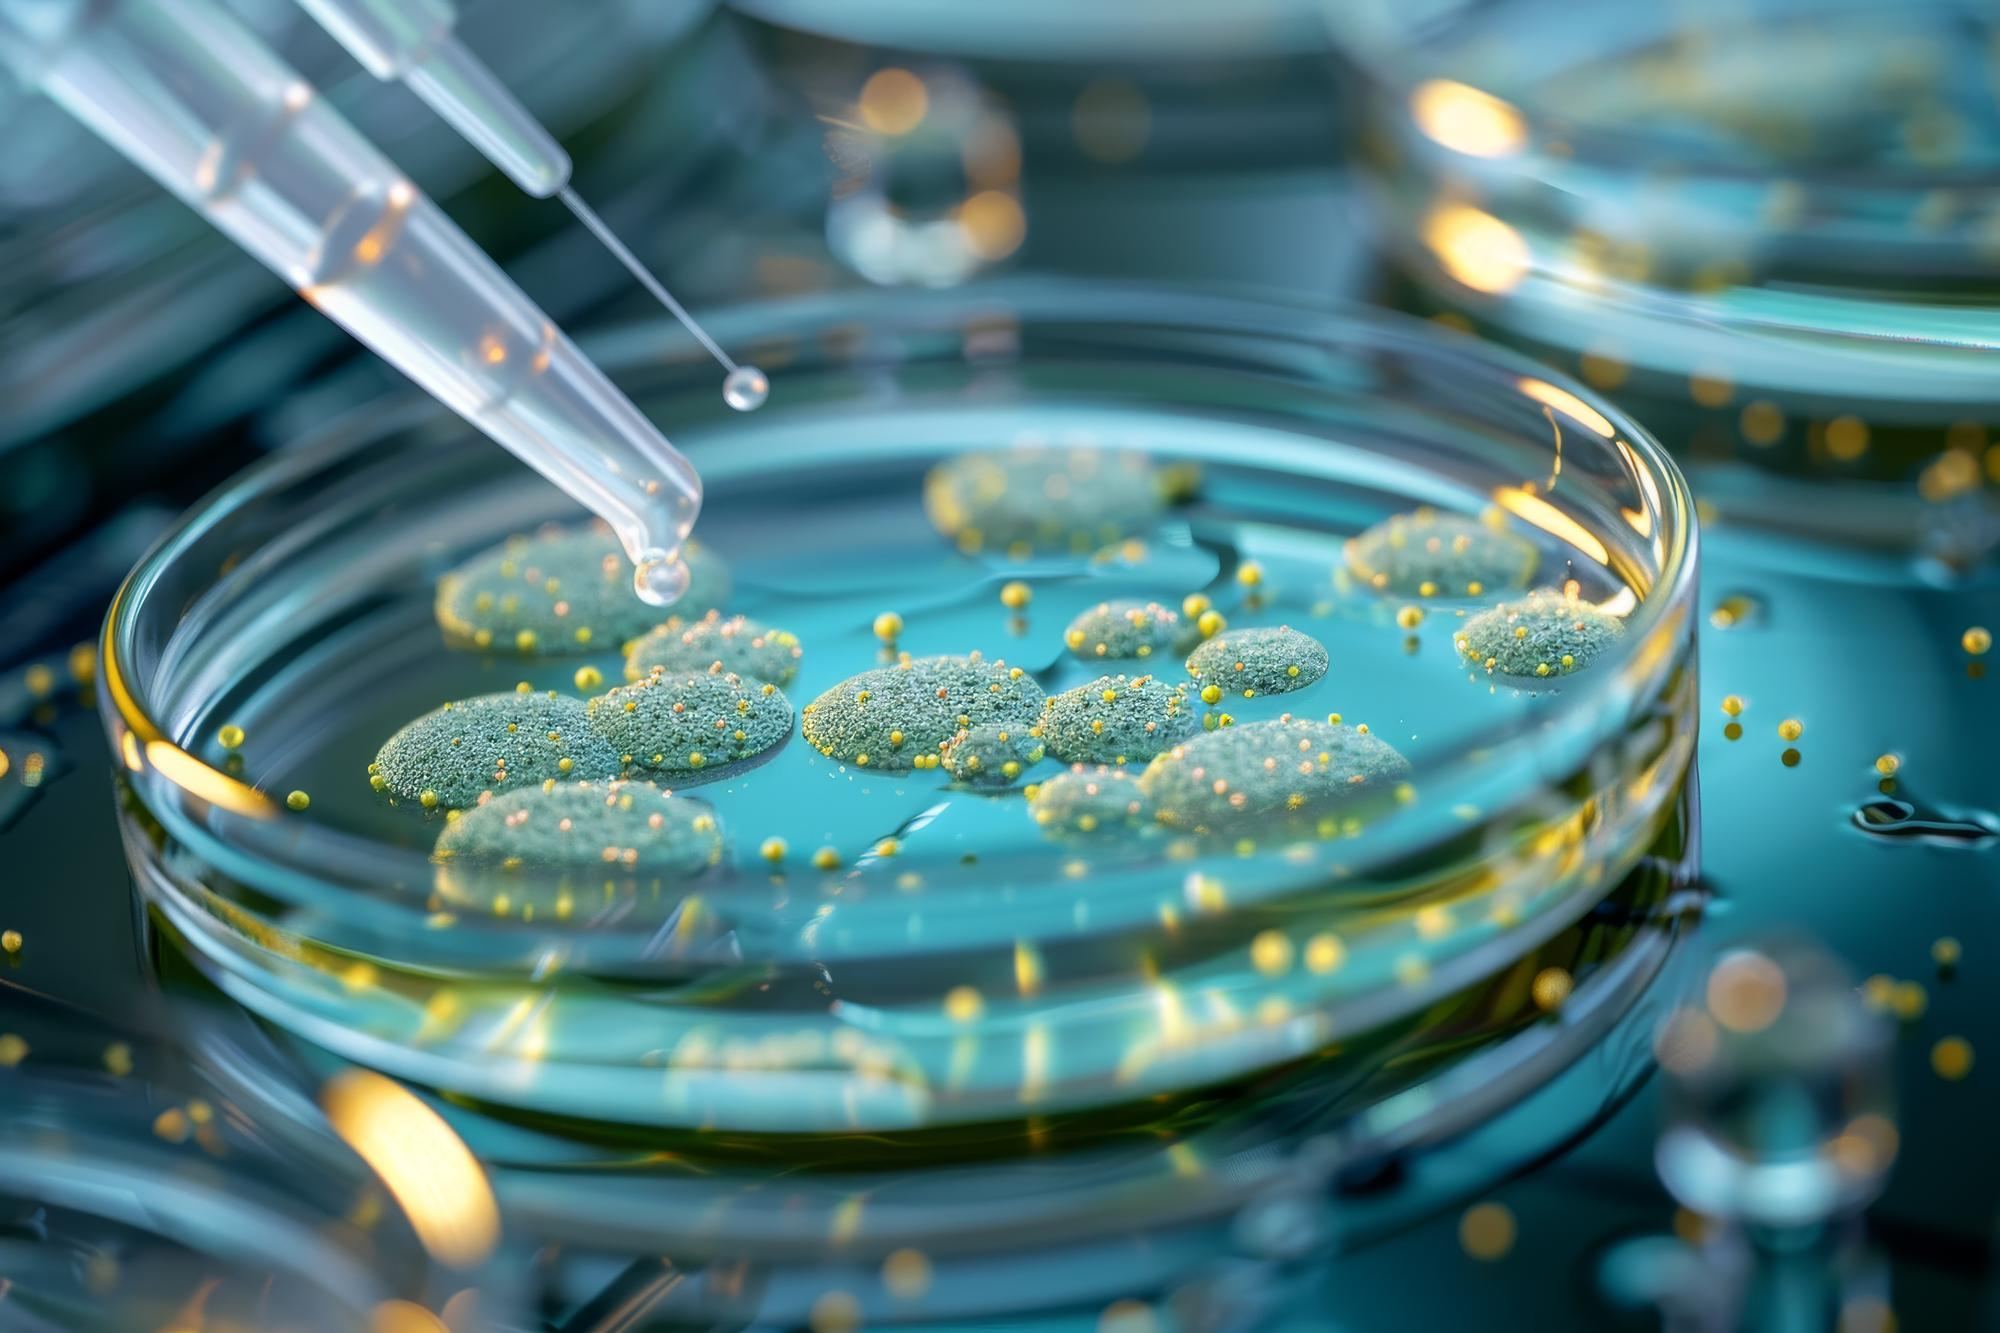 uk-govt-launches-5-yr-plan-to-combat-antimicrobial-resistance